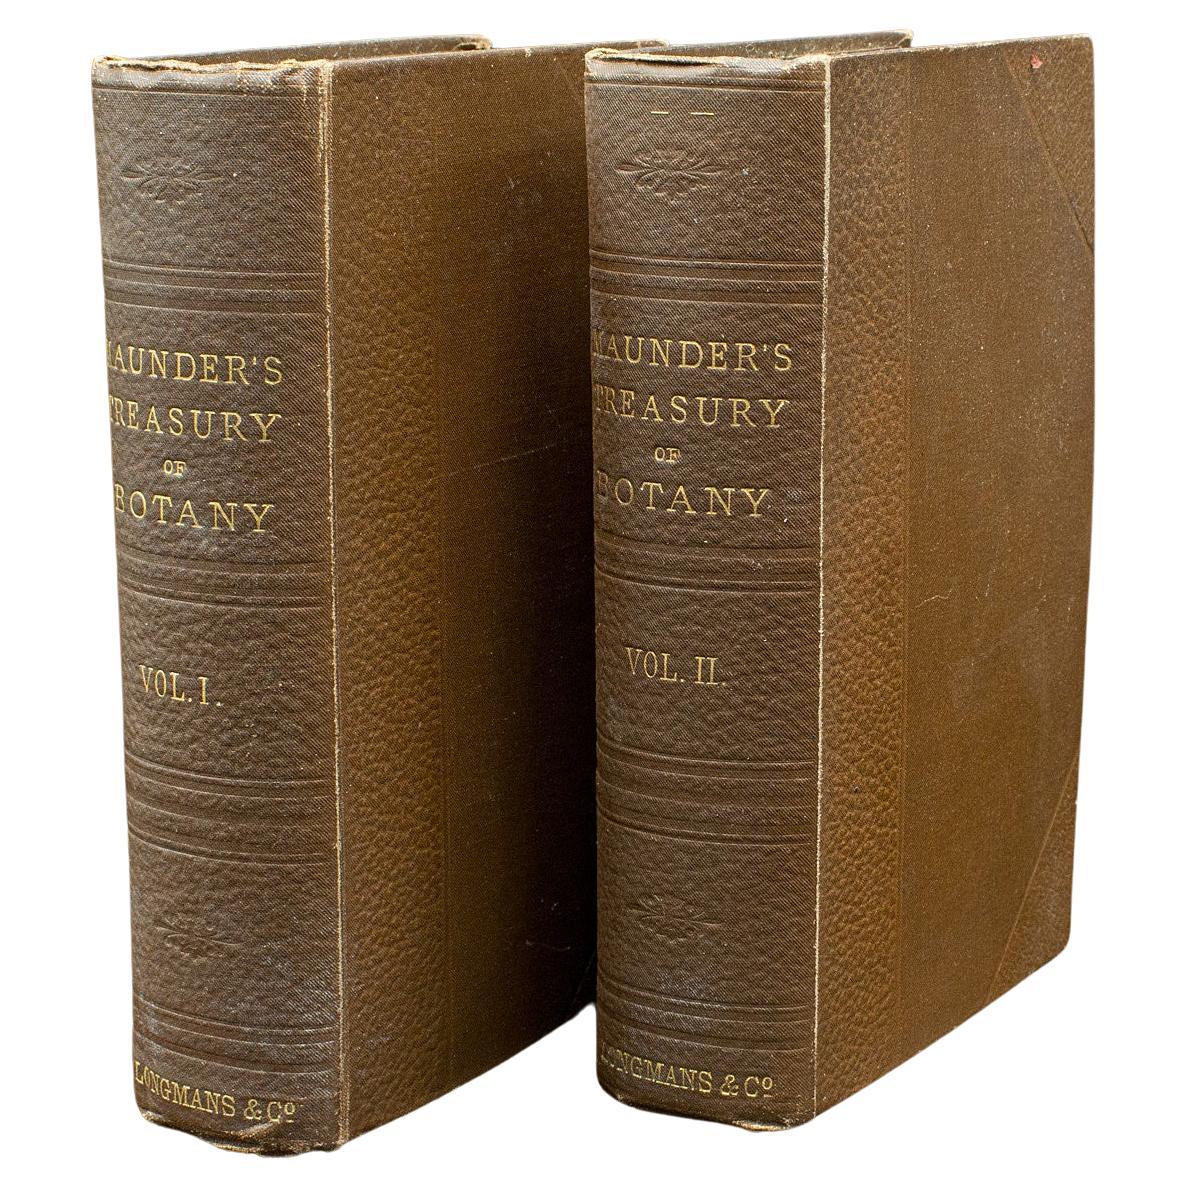 Antique Treasury Of Botany, Vol 1&2, English Language, Reference Book, Victorian For Sale